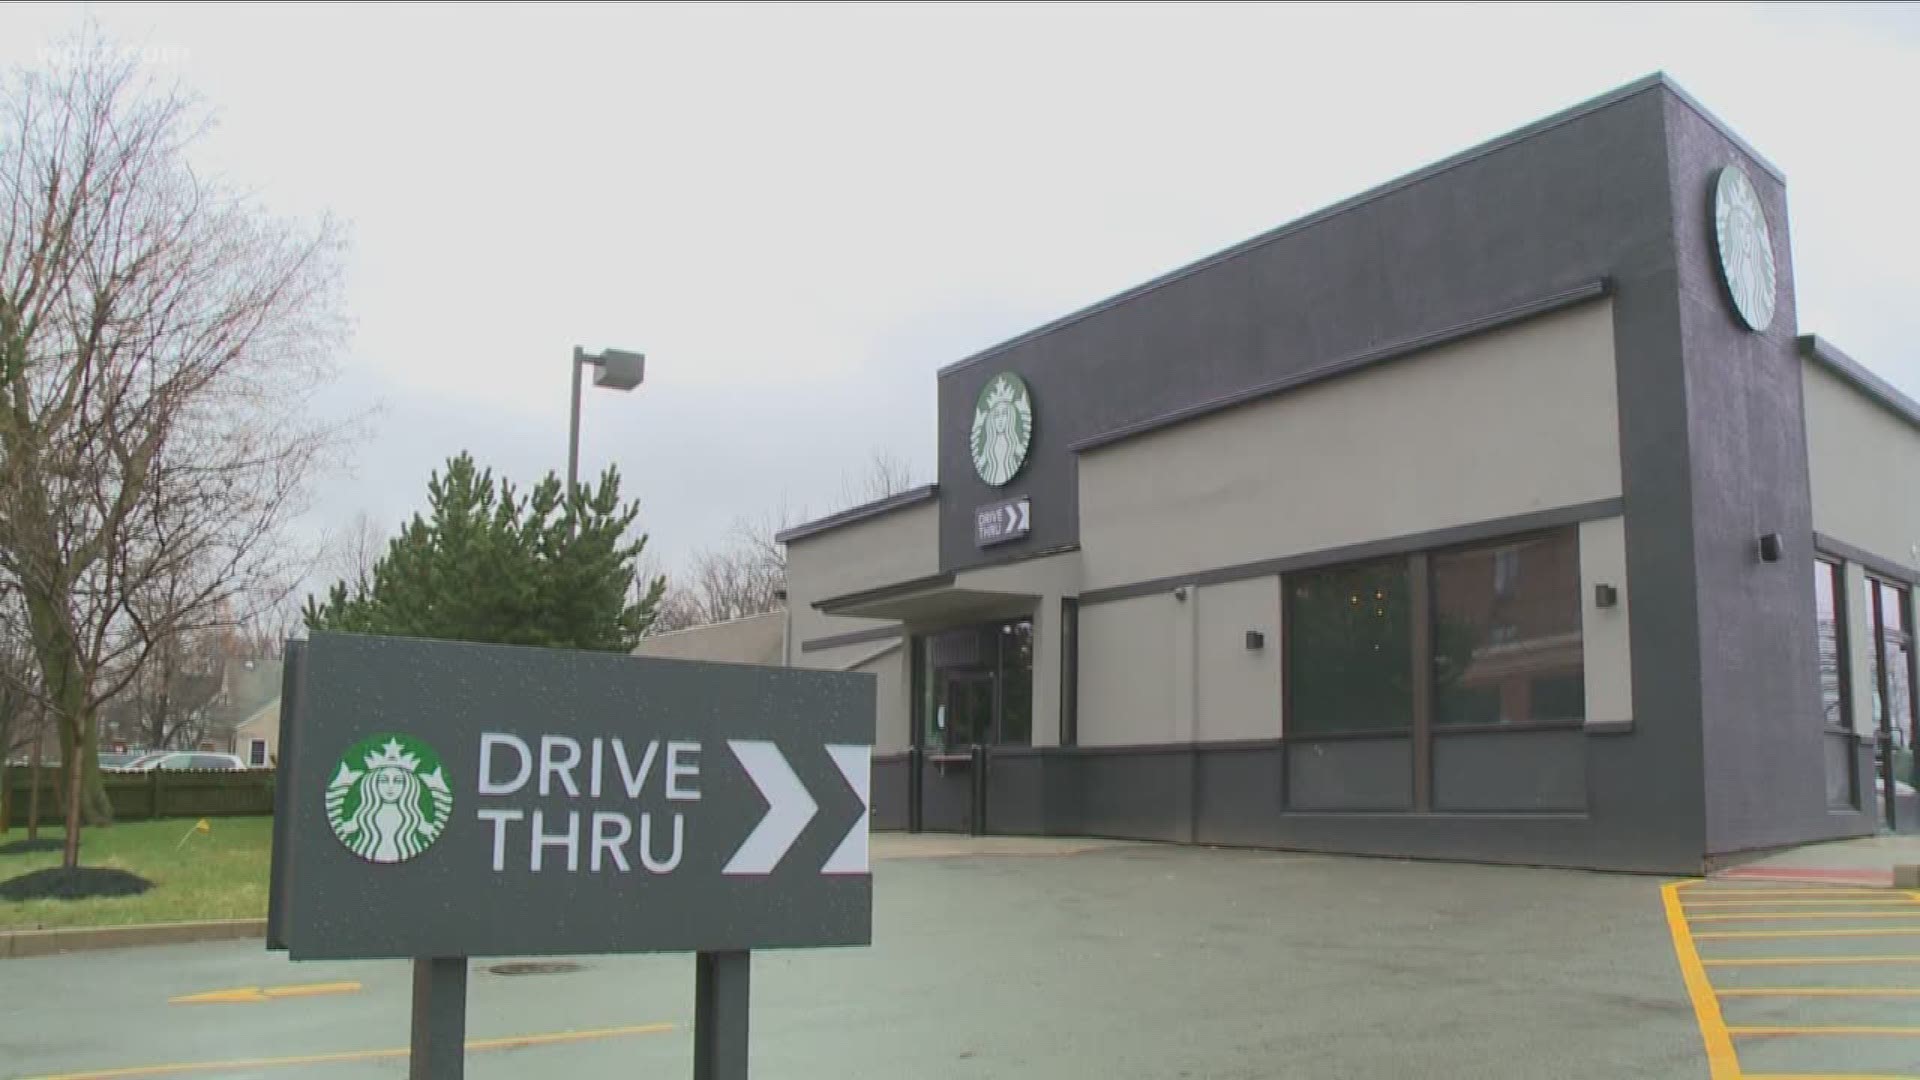 Starbucks opened a new location at the corner of Main Street and South Forest Road.